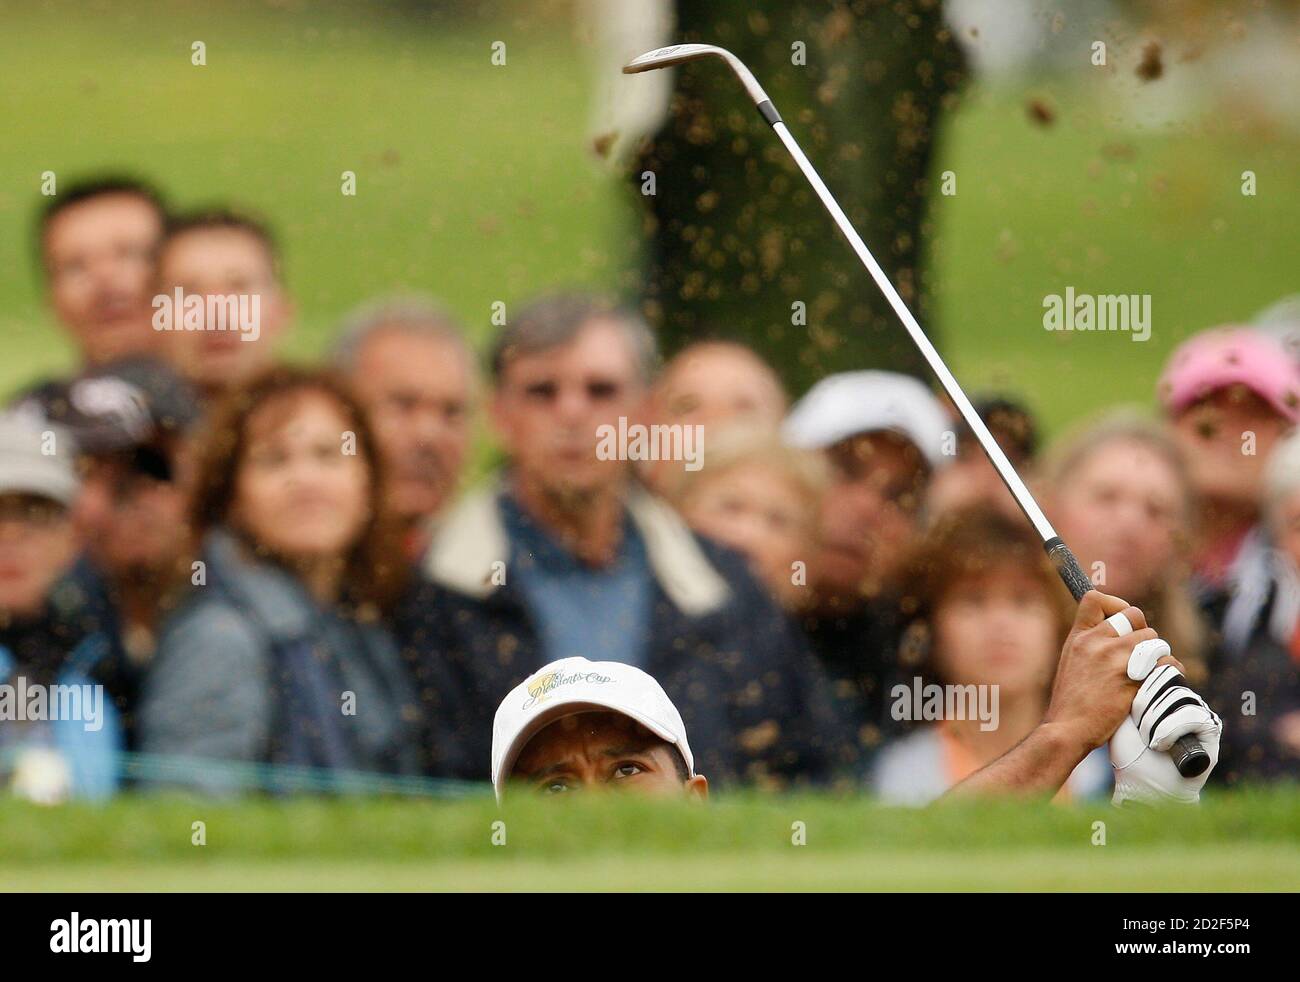 Tiger Woods of the U.S. team hits from a bunker on the third hole while playing with Charles Howell III during their first round foursome match at the President's Cup golf tournament at the Royal Montreal Golf Club, September 27, 2007.     REUTERS/Shaun Best (CANADA) Stock Photo